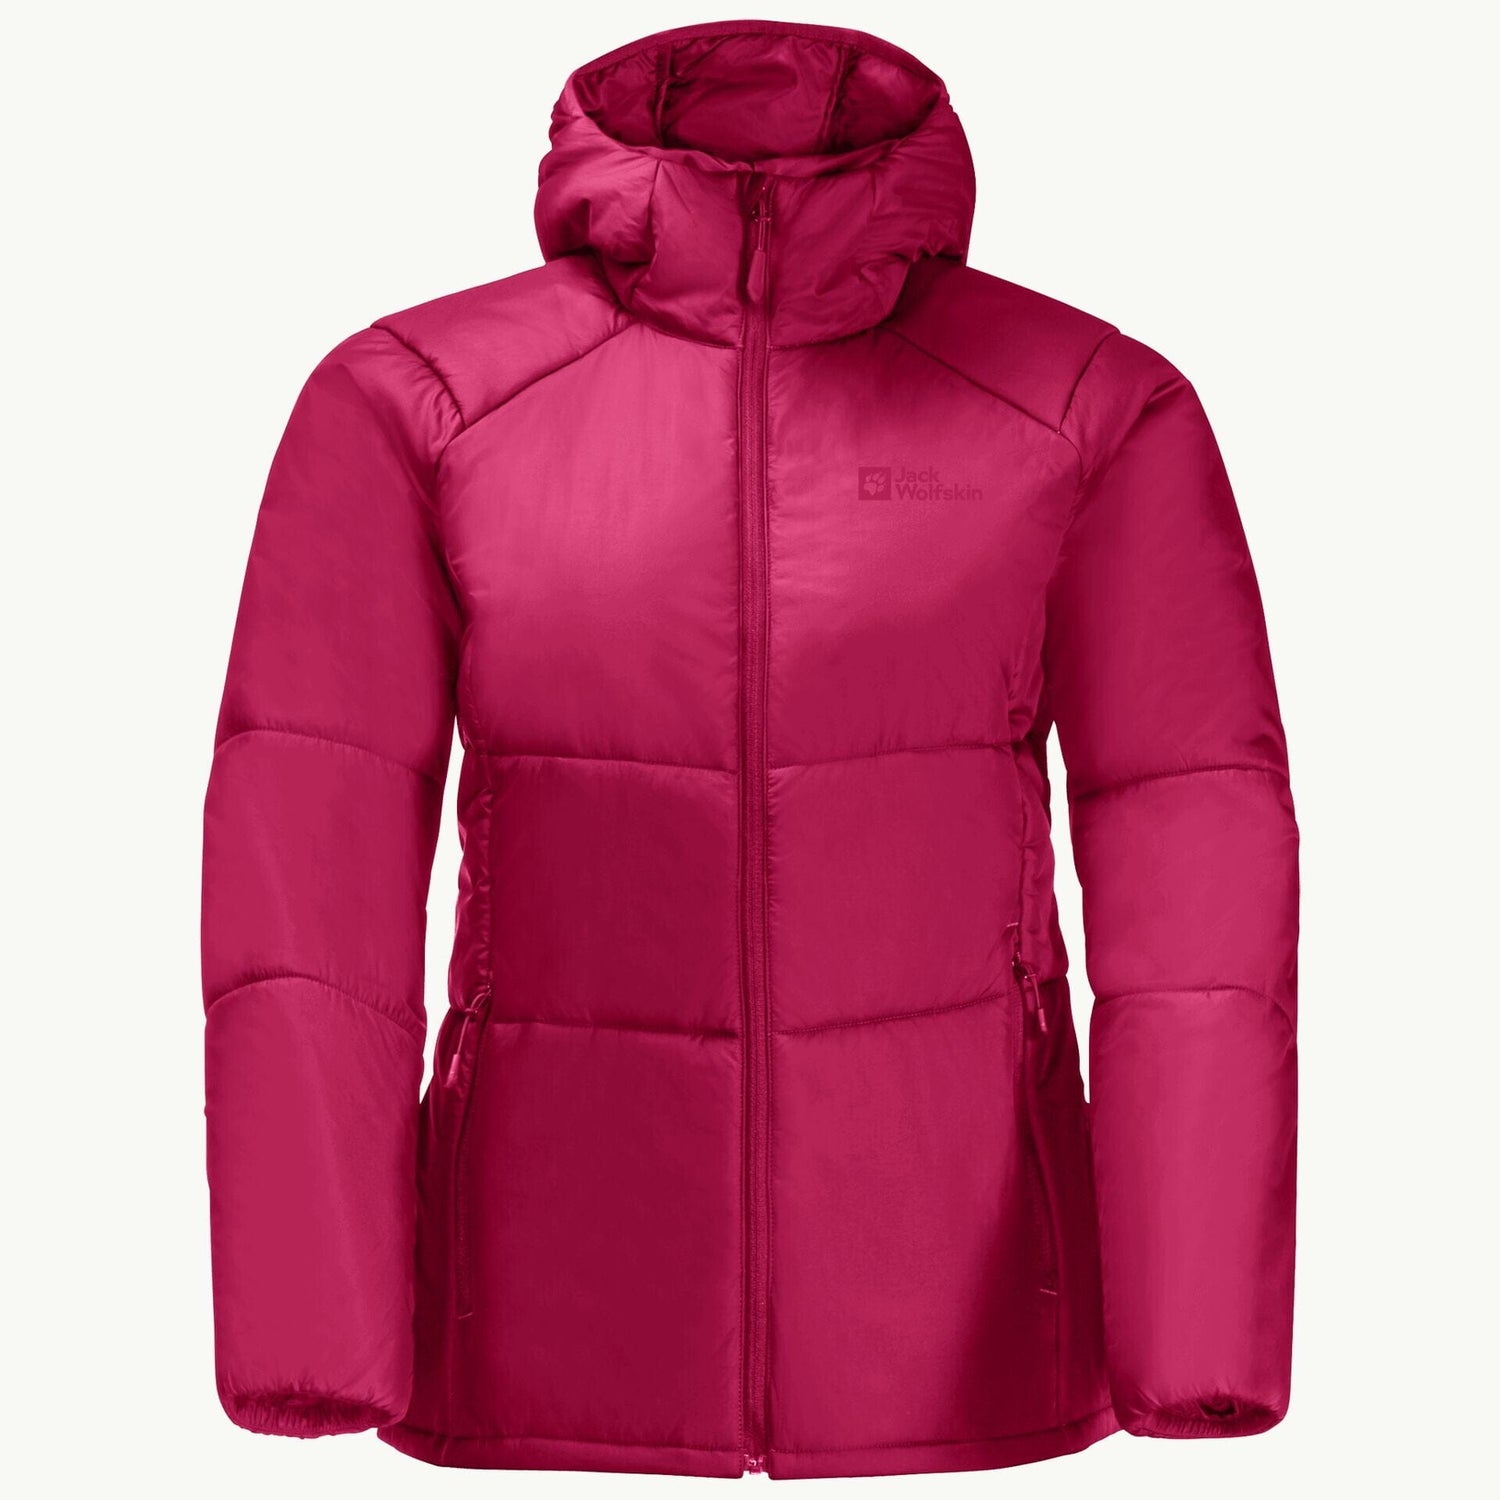 Jack Wolfskin Hoody – W\'s insulated Bergland sustainable - Weekendbee - Recycled materials sportswear Ins jacket